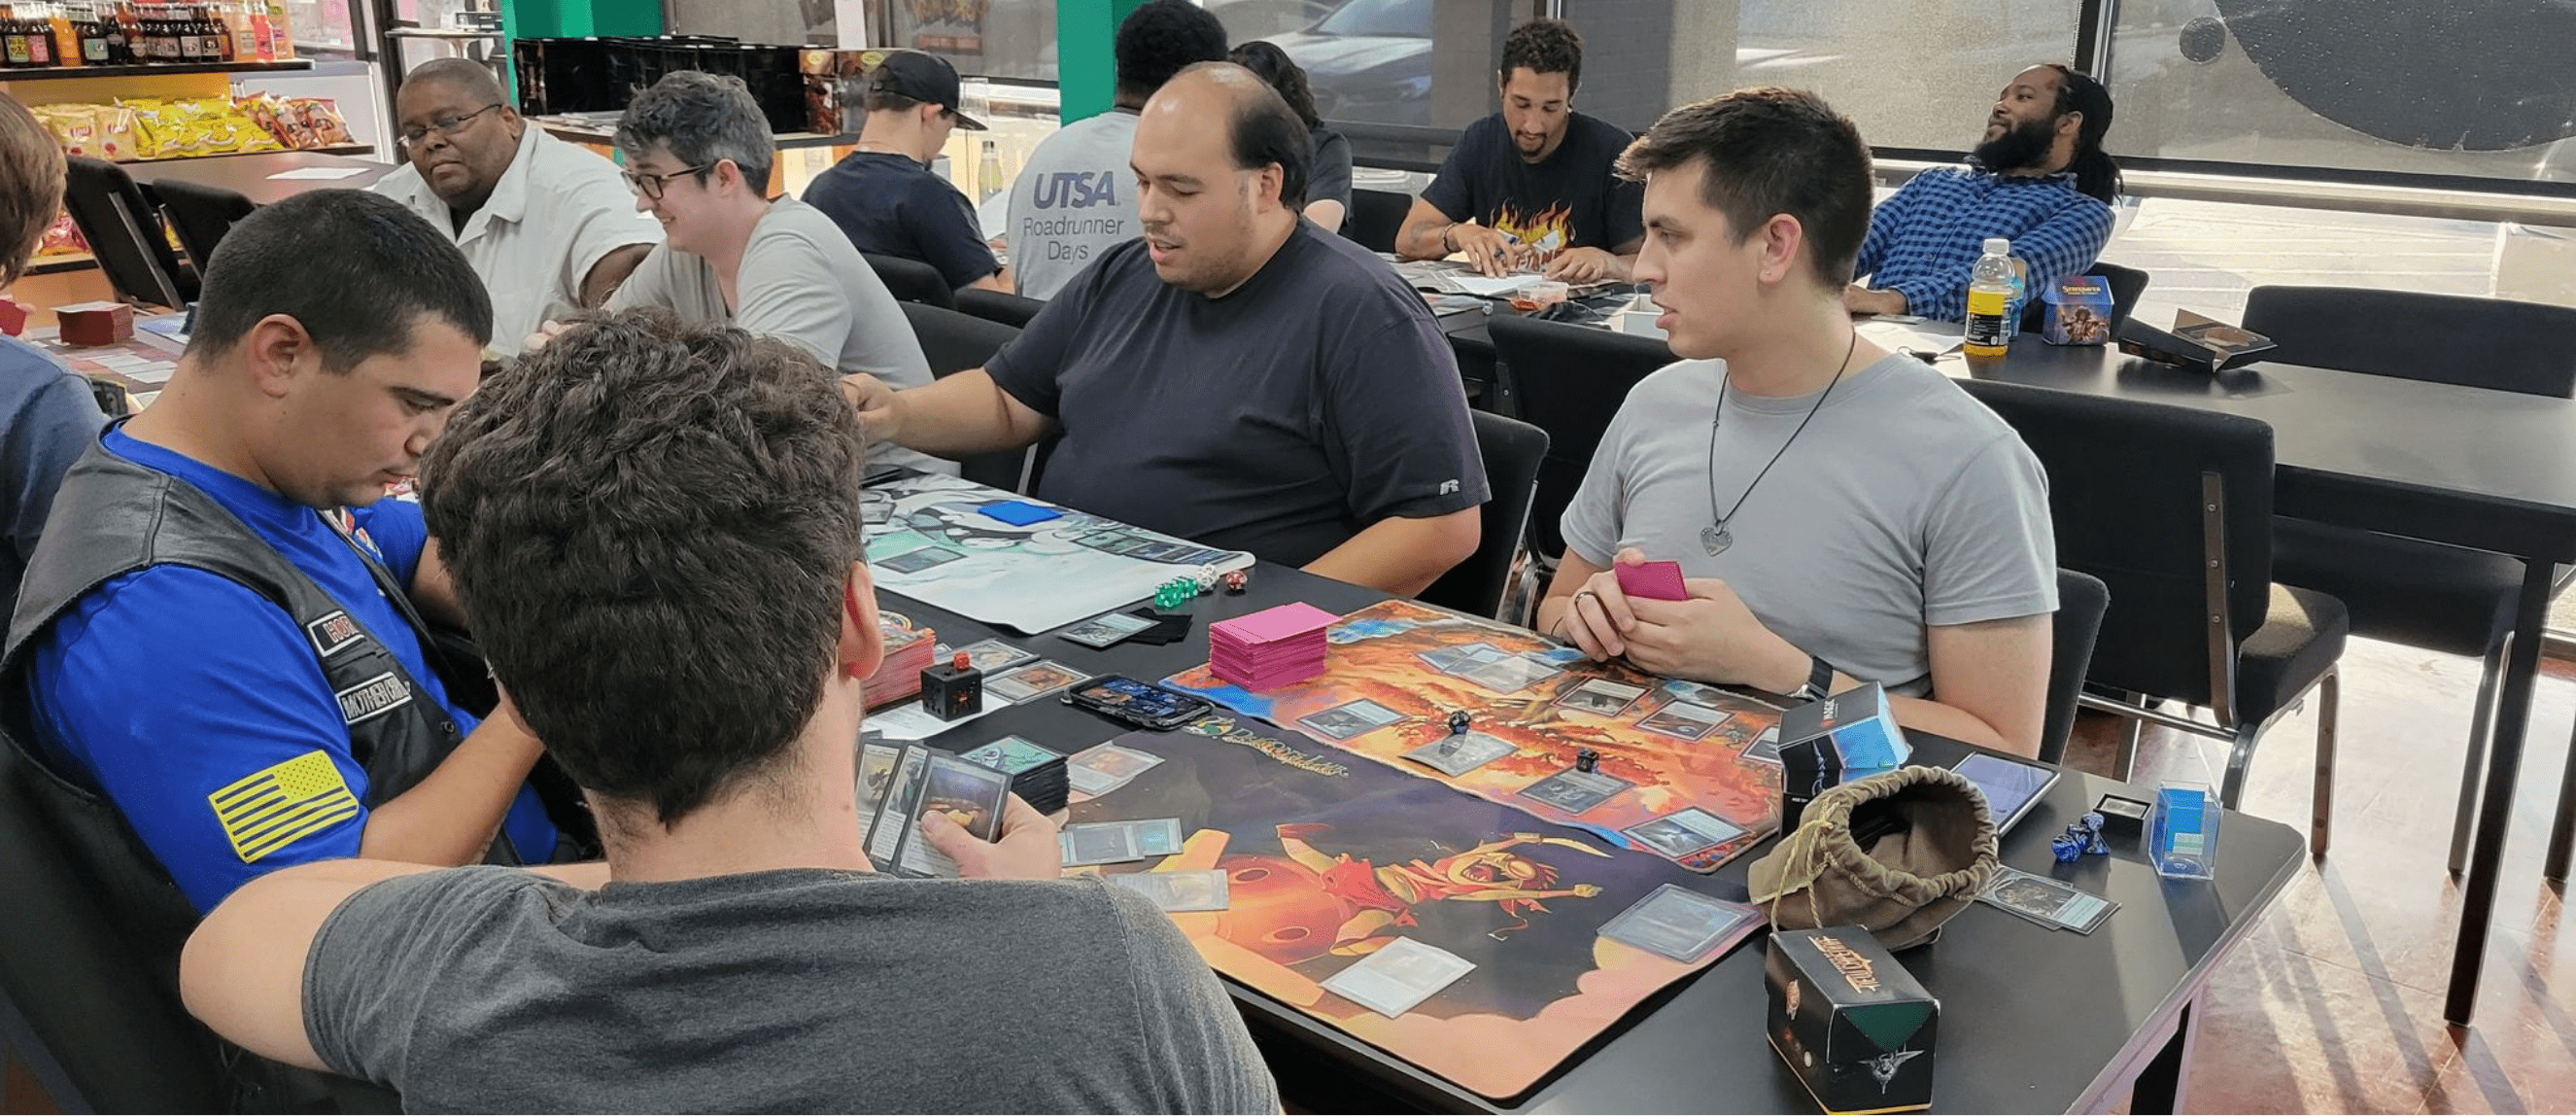 members of Dragon's Lair's inclusive gaming community at a Magic event